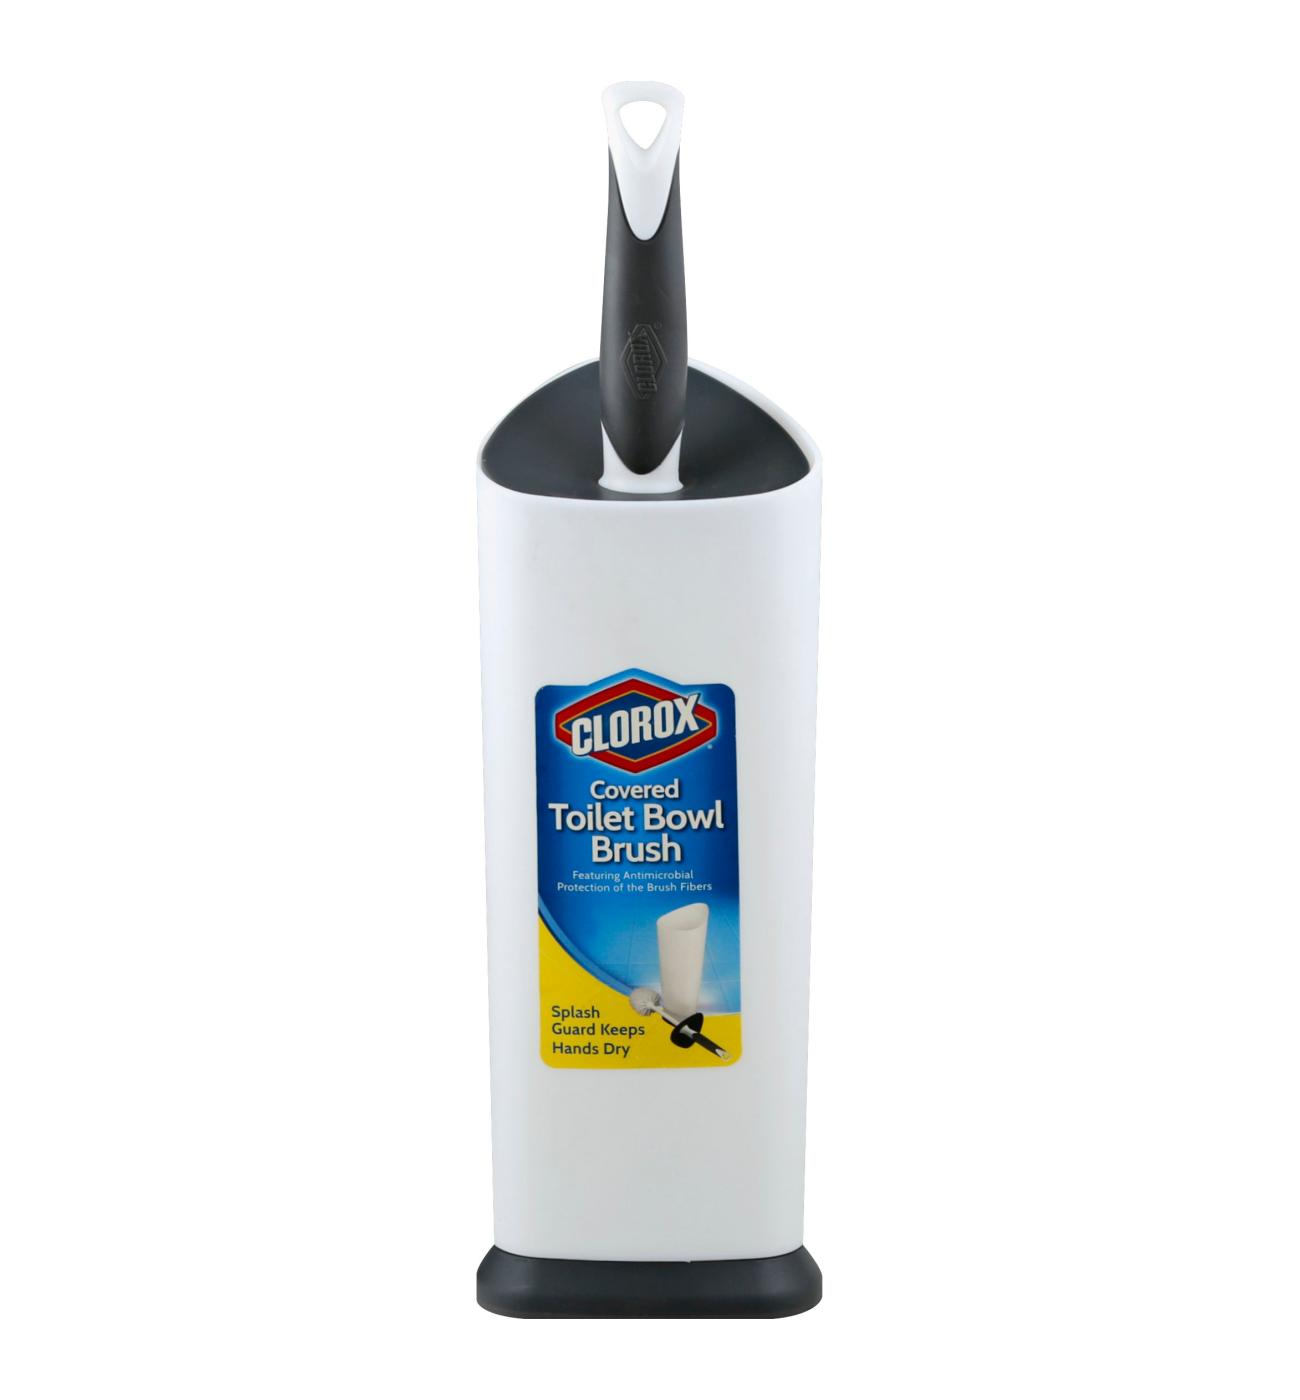 Clorox Covered Toilet Bowl Brush; image 1 of 2